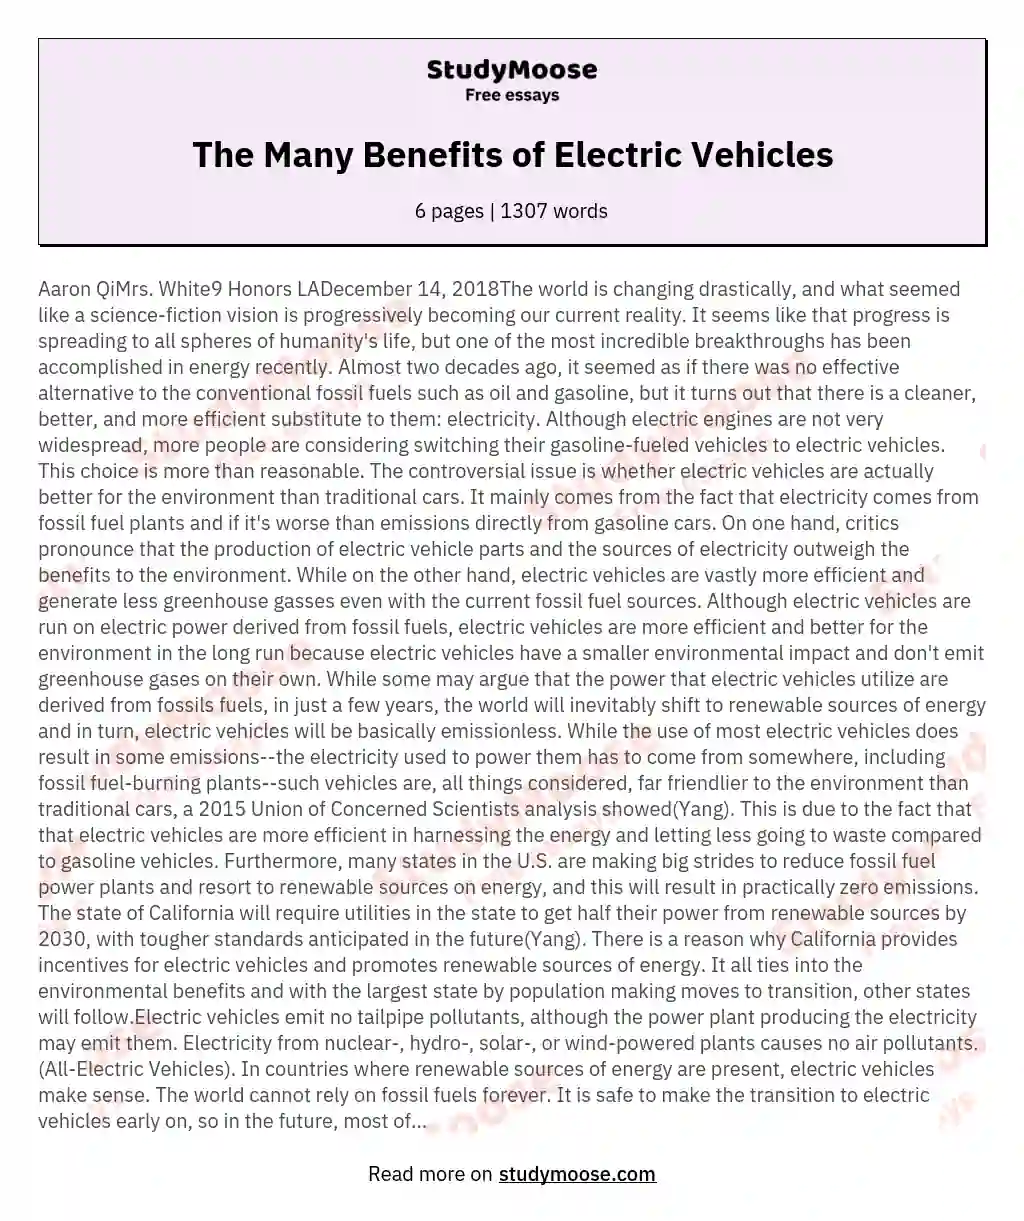 The Many Benefits of Electric Vehicles